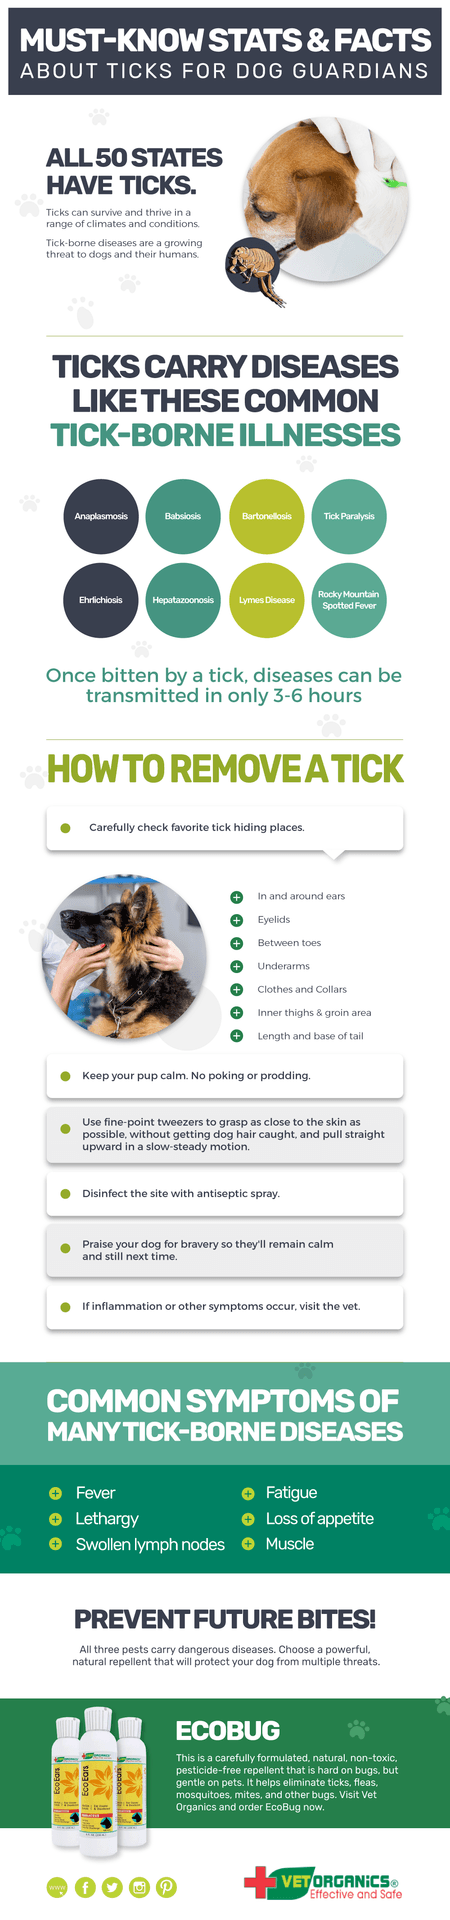 Guide to Ticks & Pet Safety